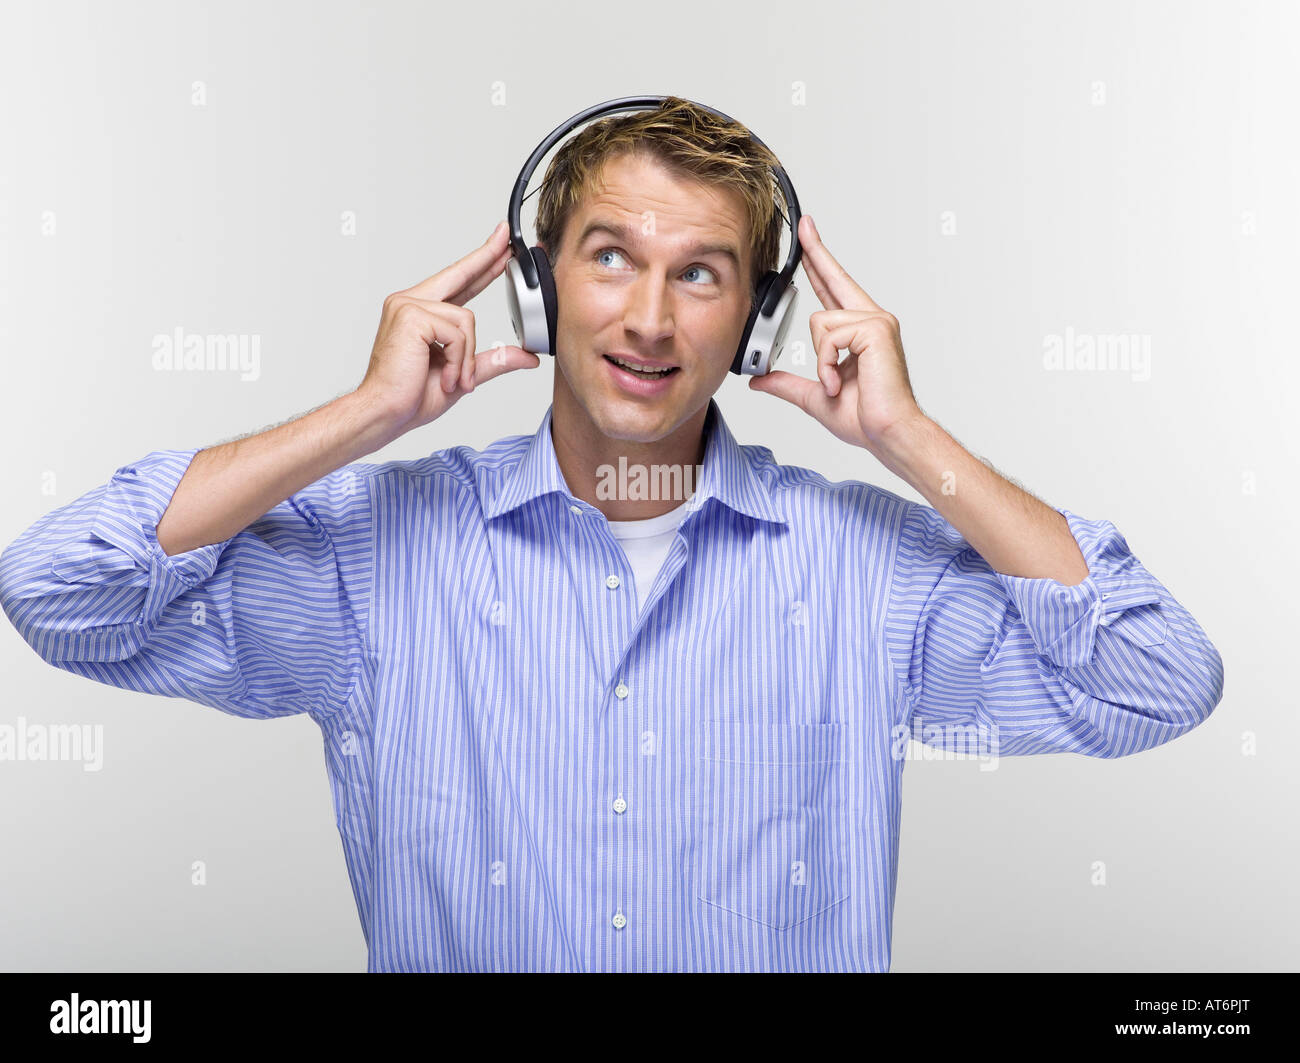 Young man wearing headphones listening to music, portrait Banque D'Images